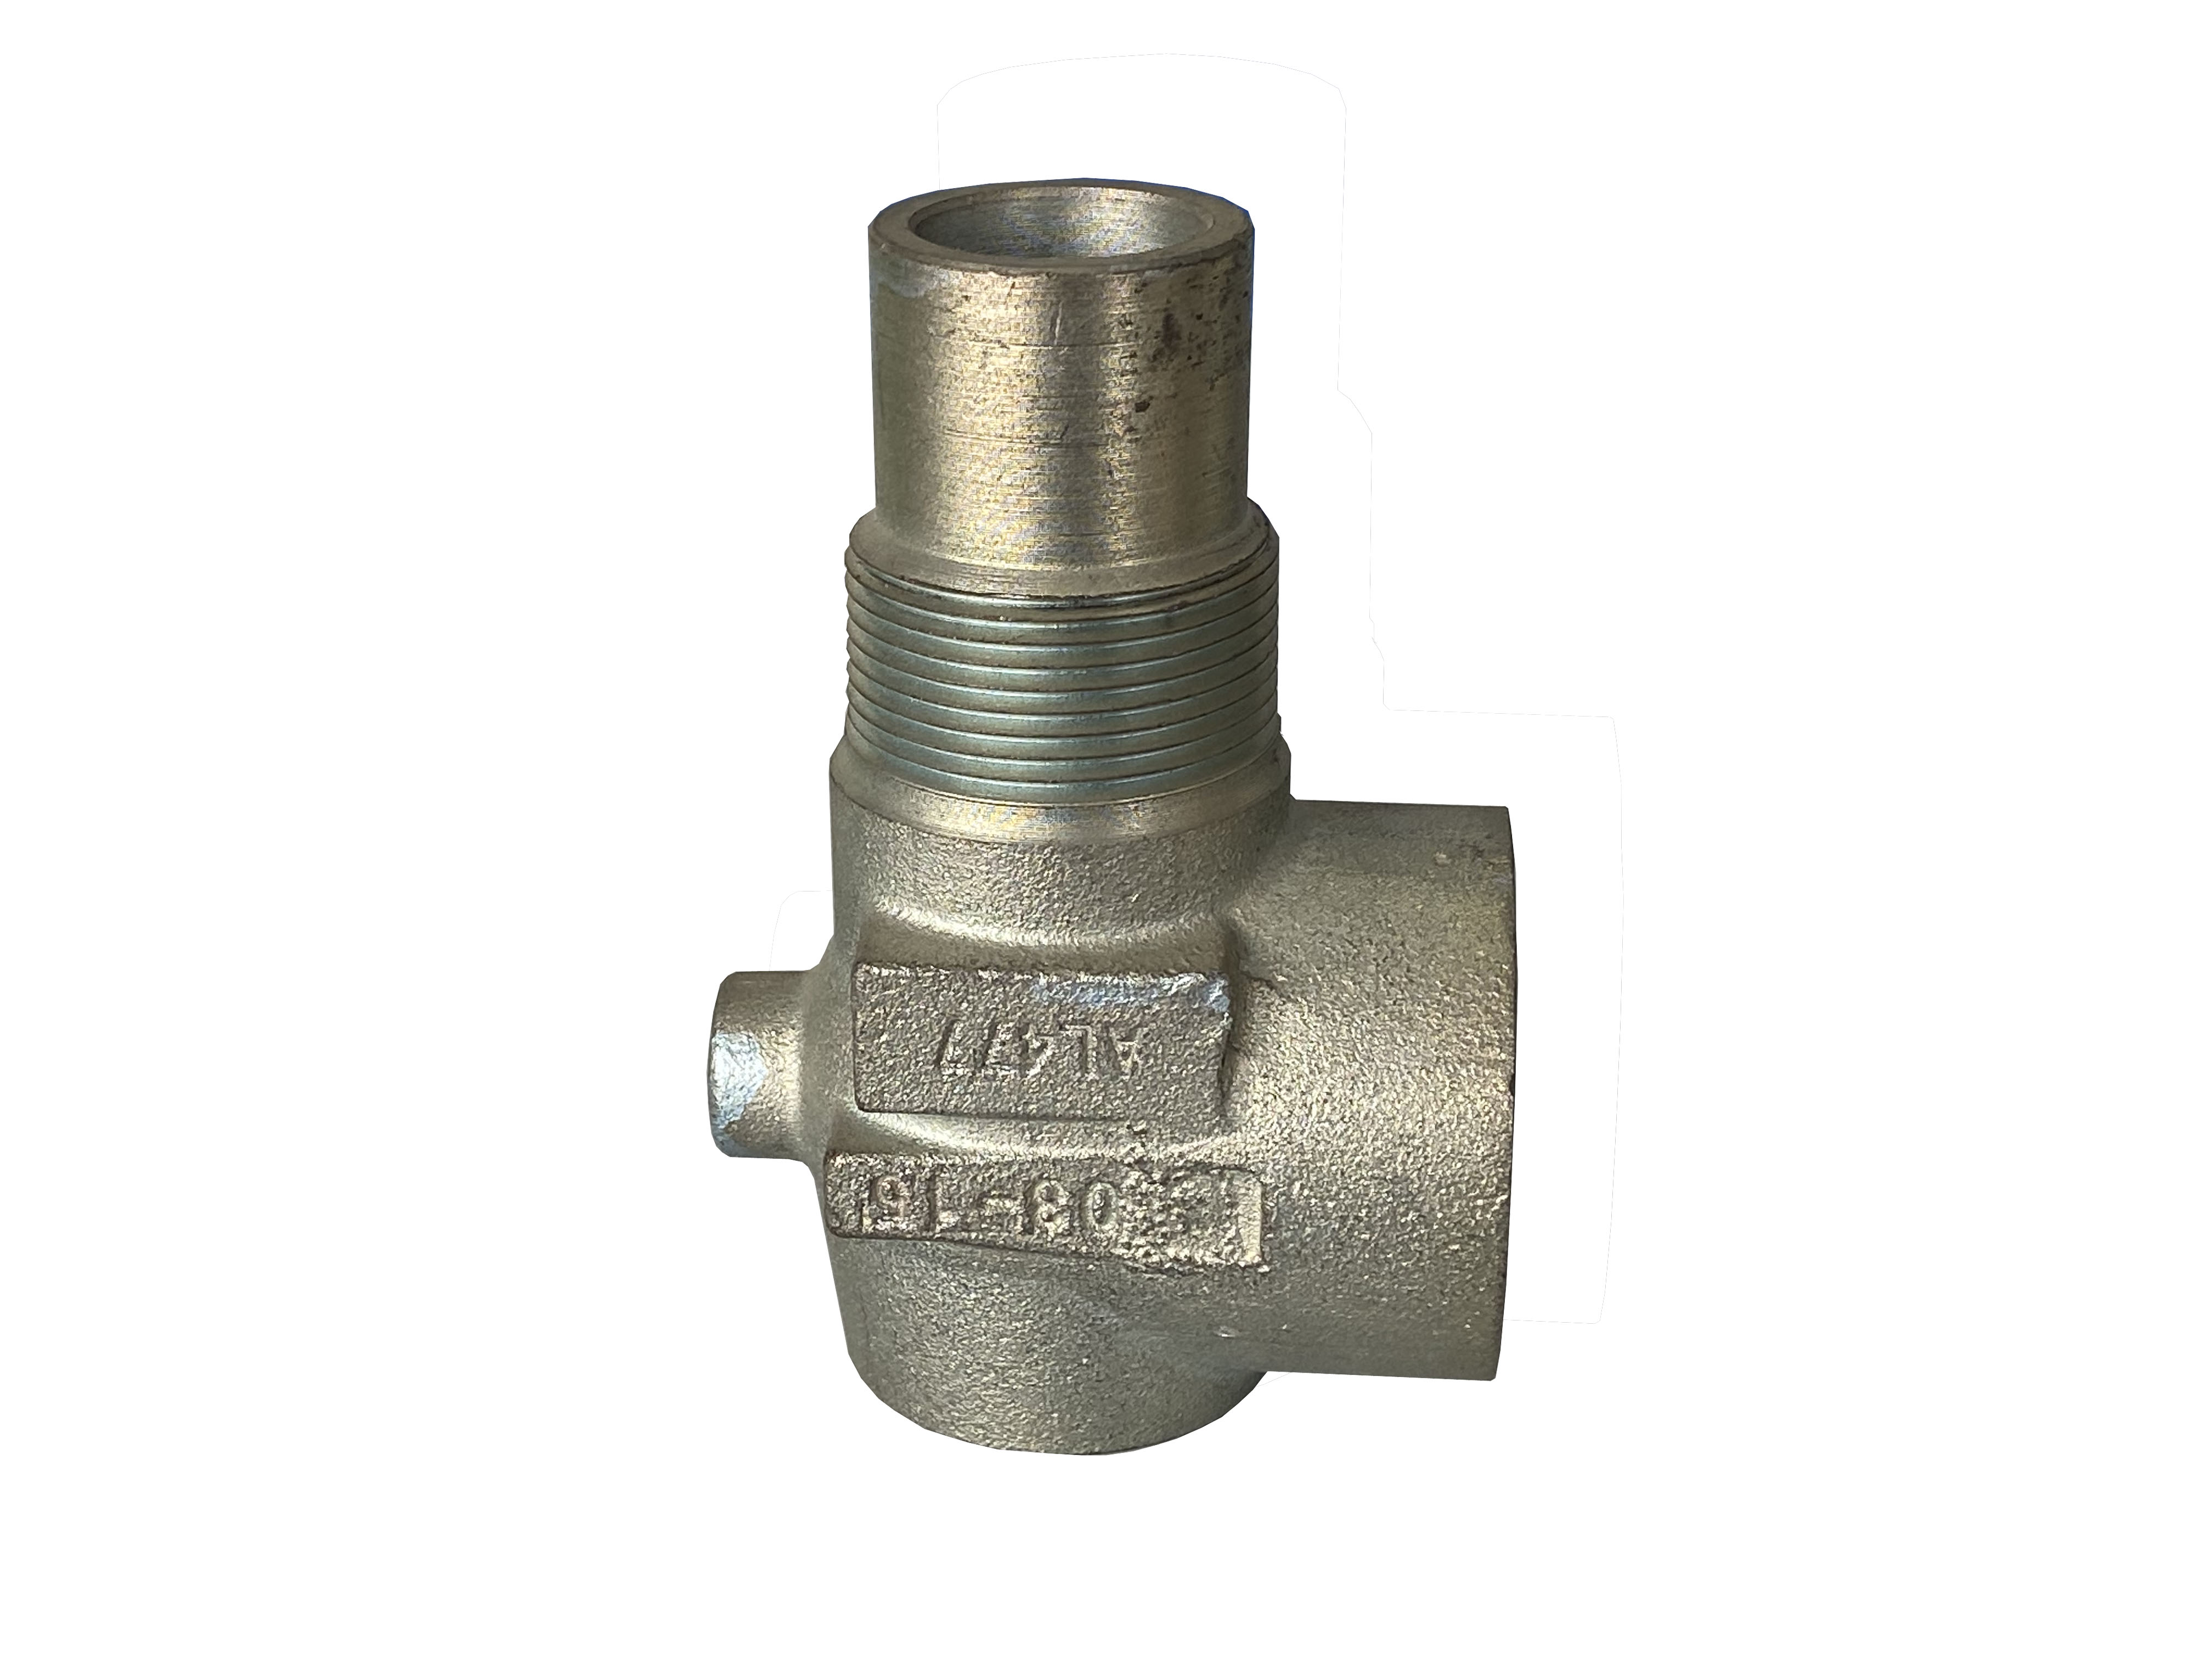 Custom Made Made Casting Casting Casting Casting Lost Parting Parts Valve Parts